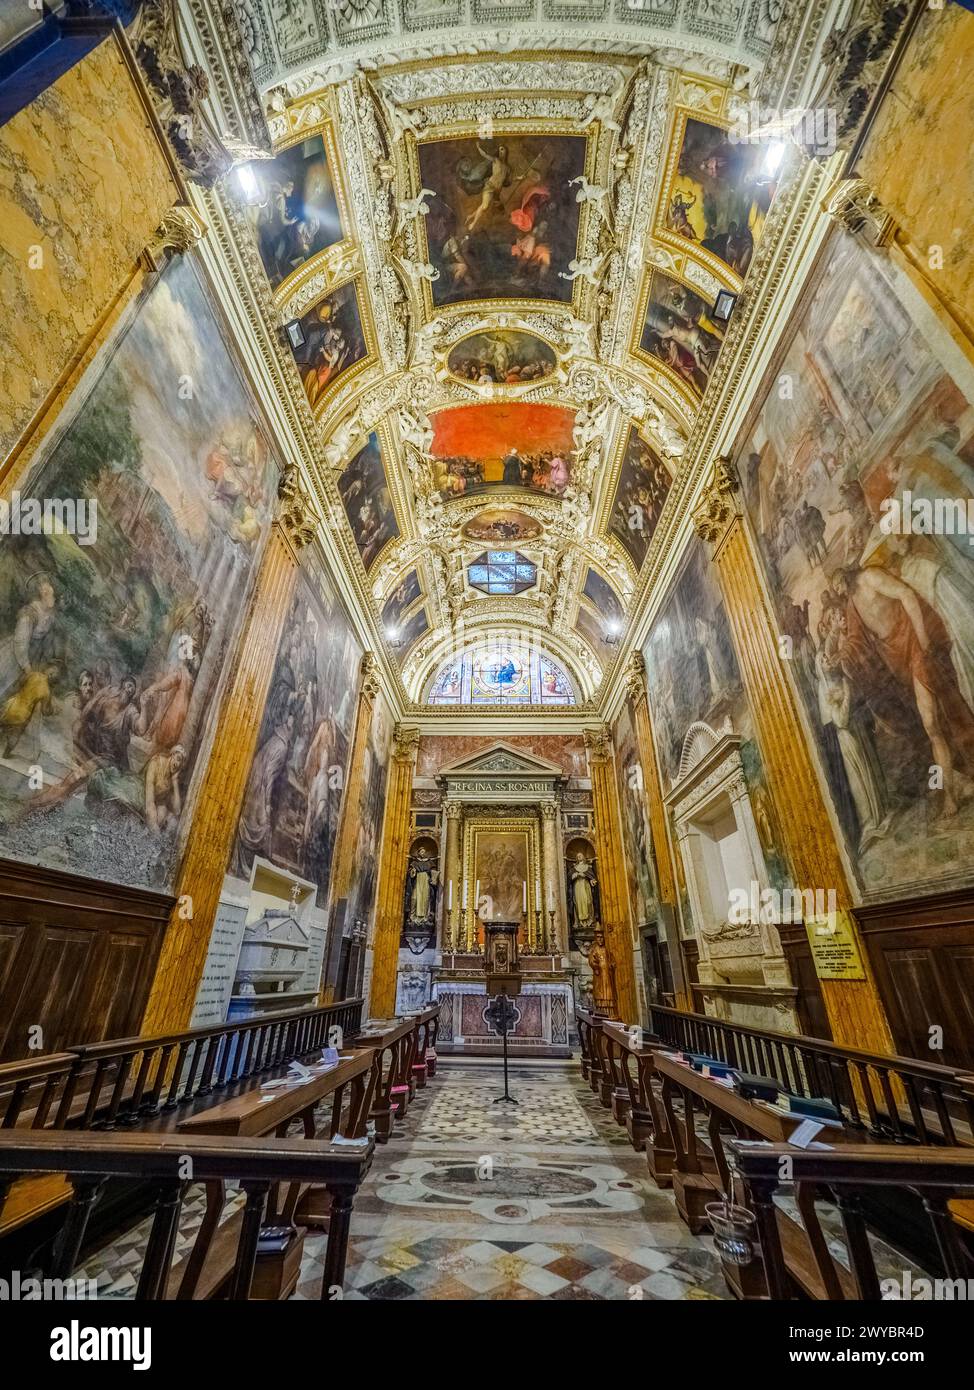 The Capranica chapel is also known as the Chapel of the Rosary. The stucco ceiling was made in 1573 by Marcello Venusti. The chapel contains the tomb of Cardinal Domenico Capranica by Andrea Bregno - Basilica di Santa Maria sopra Minerva - Rome, Italy Stock Photo